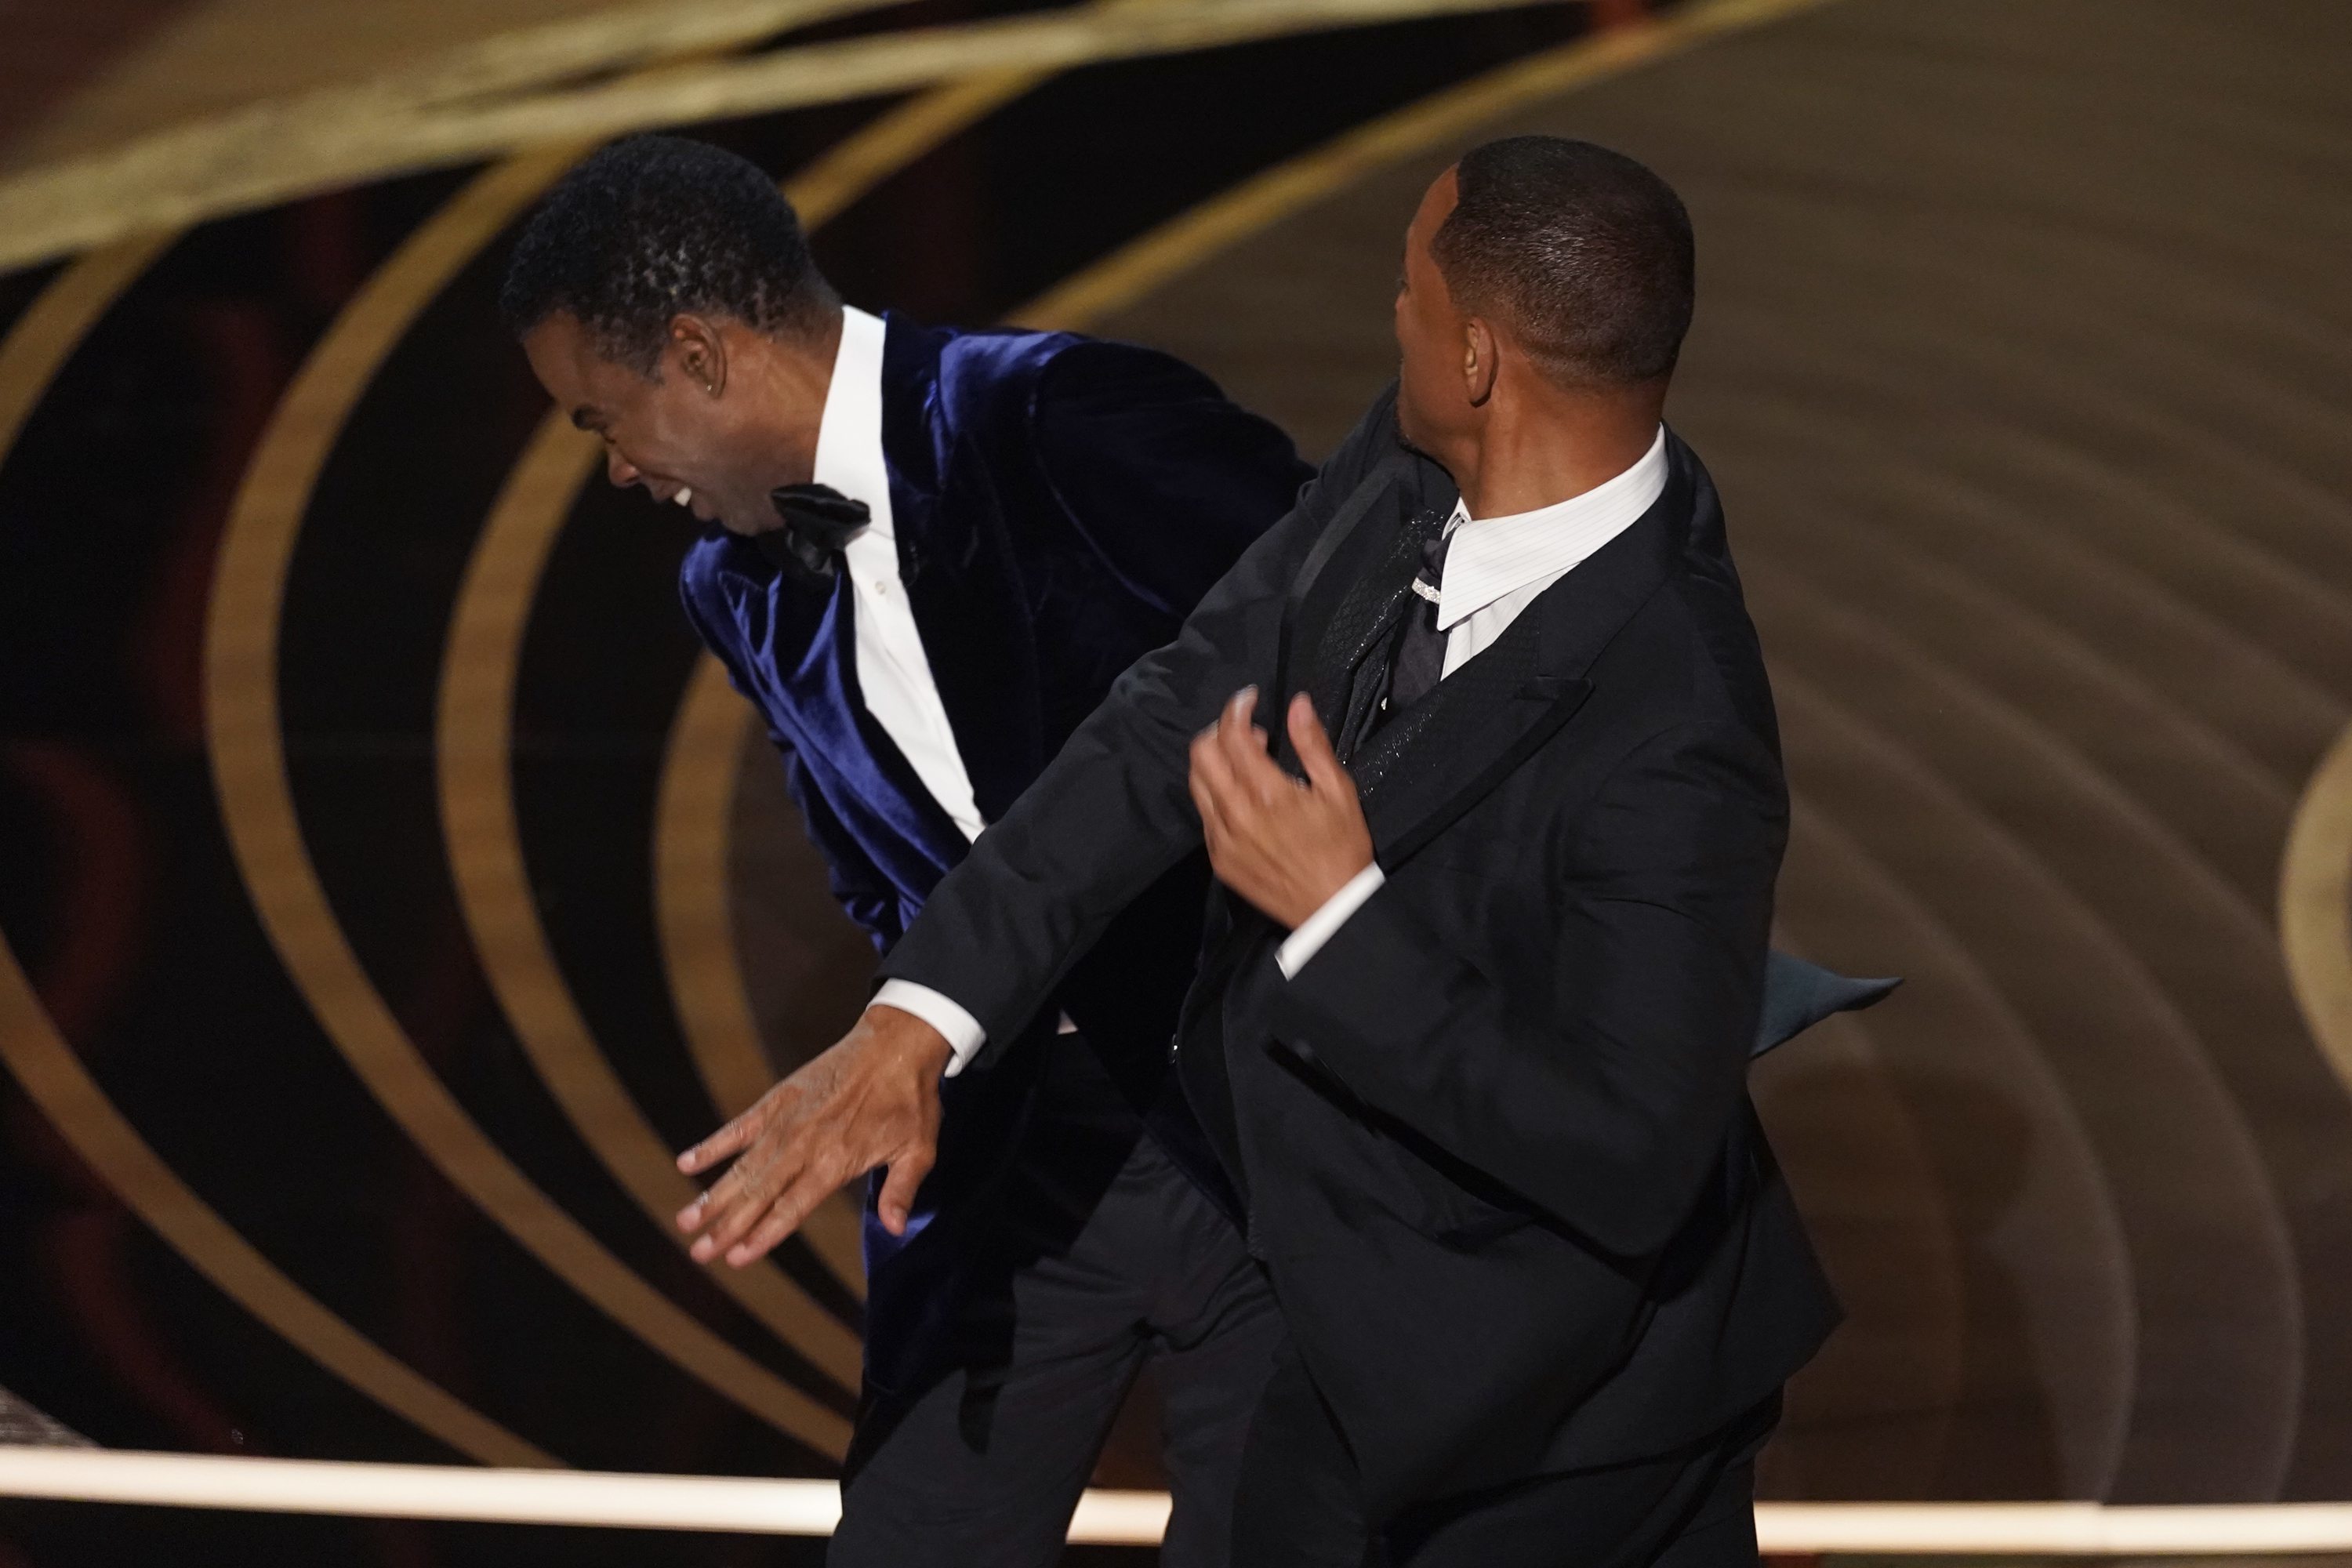 Everything you need to know about what happened between Will Smith and Chris Rock pic